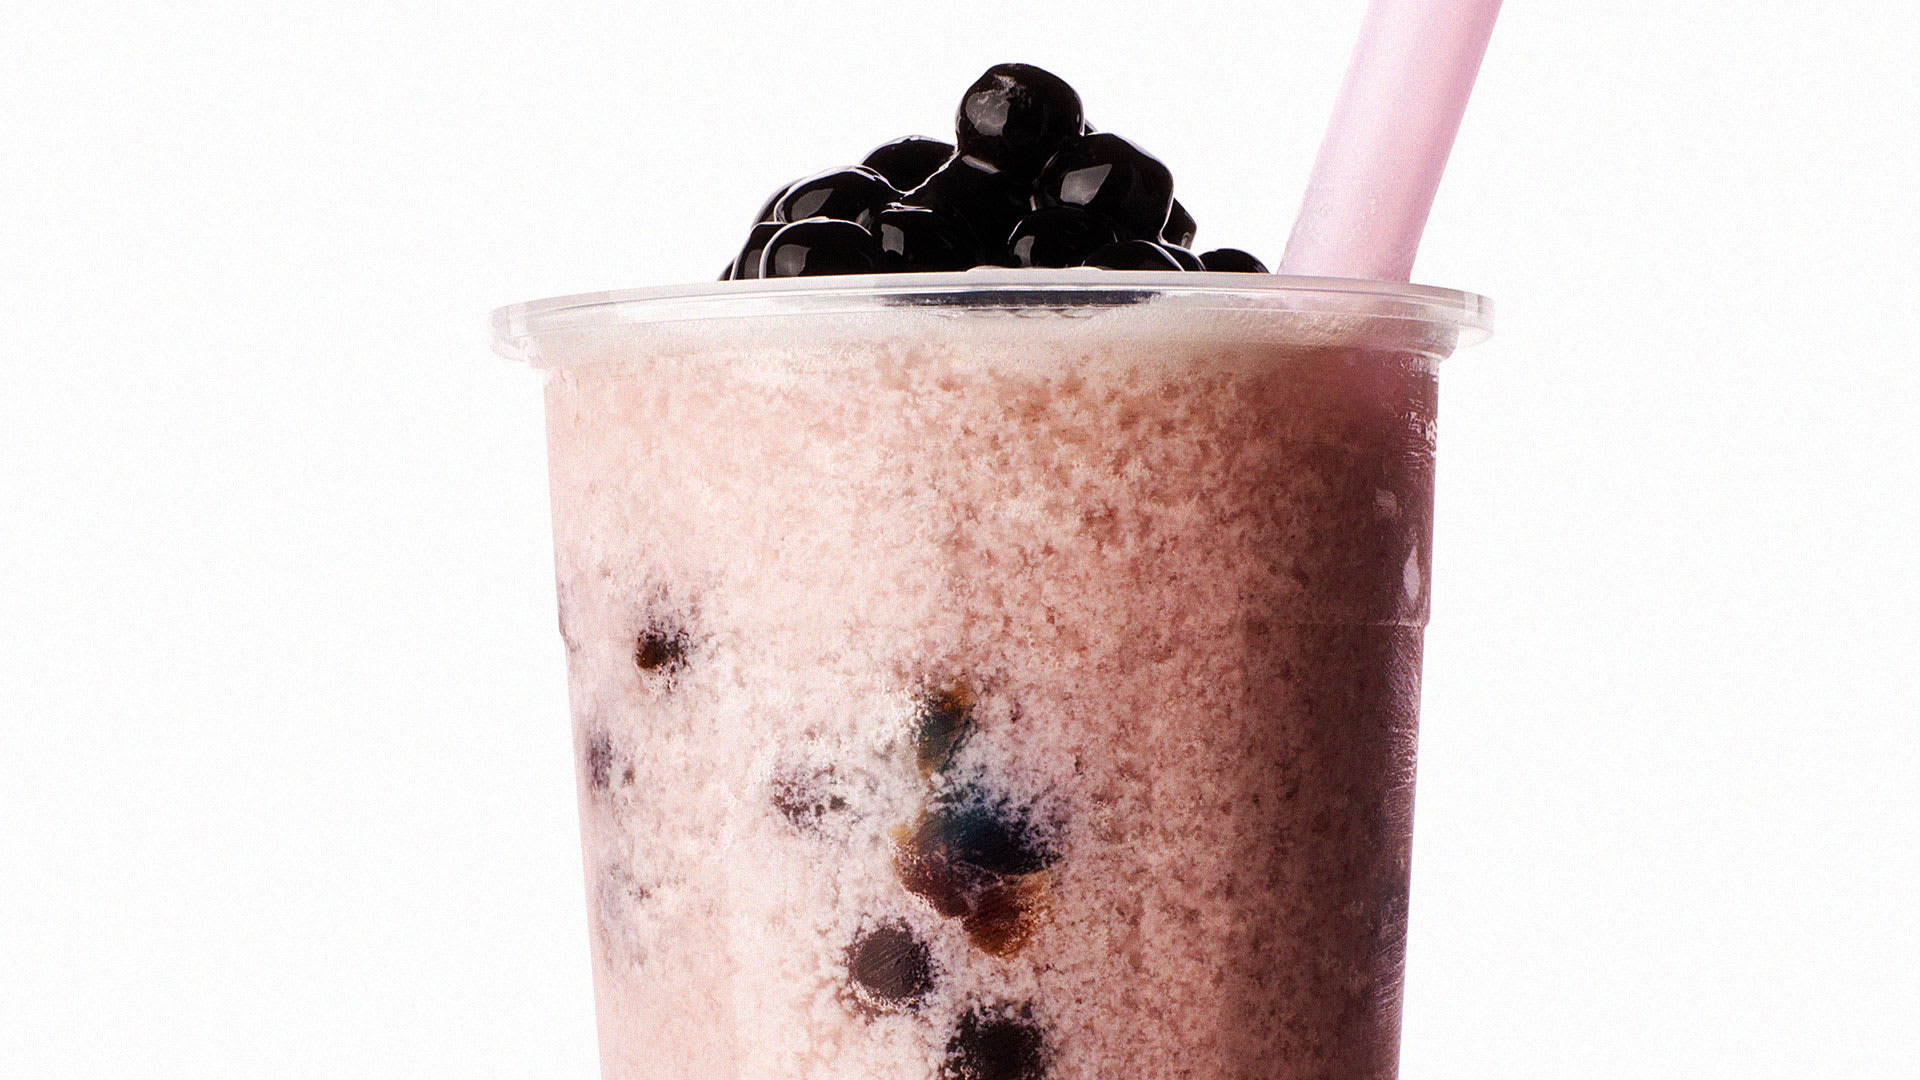 The New York Times just discovered bubble tea, which has been around for decades